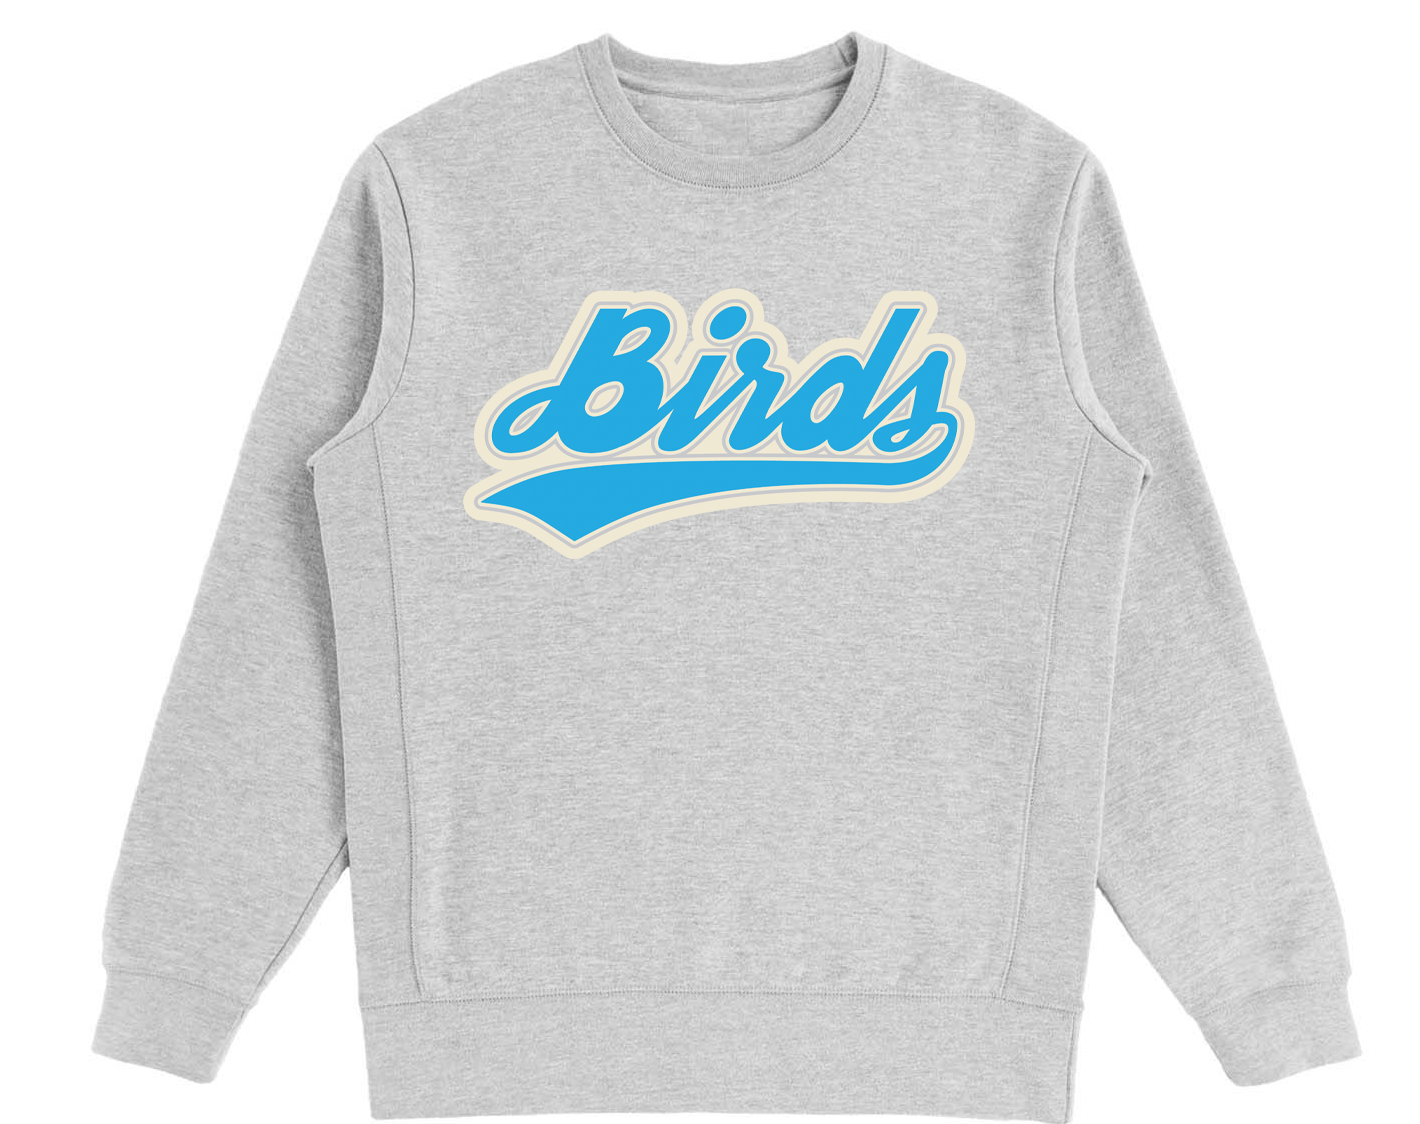 Bird Club sweatshirt featuring chenille embroidery of the word 'Birds' in blue. The sweatshirt is framed against a plain white background, showcasing its design and quality. This product emphasizes Bird Club's commitment to sustainable brands, bird watching, and ornithology.